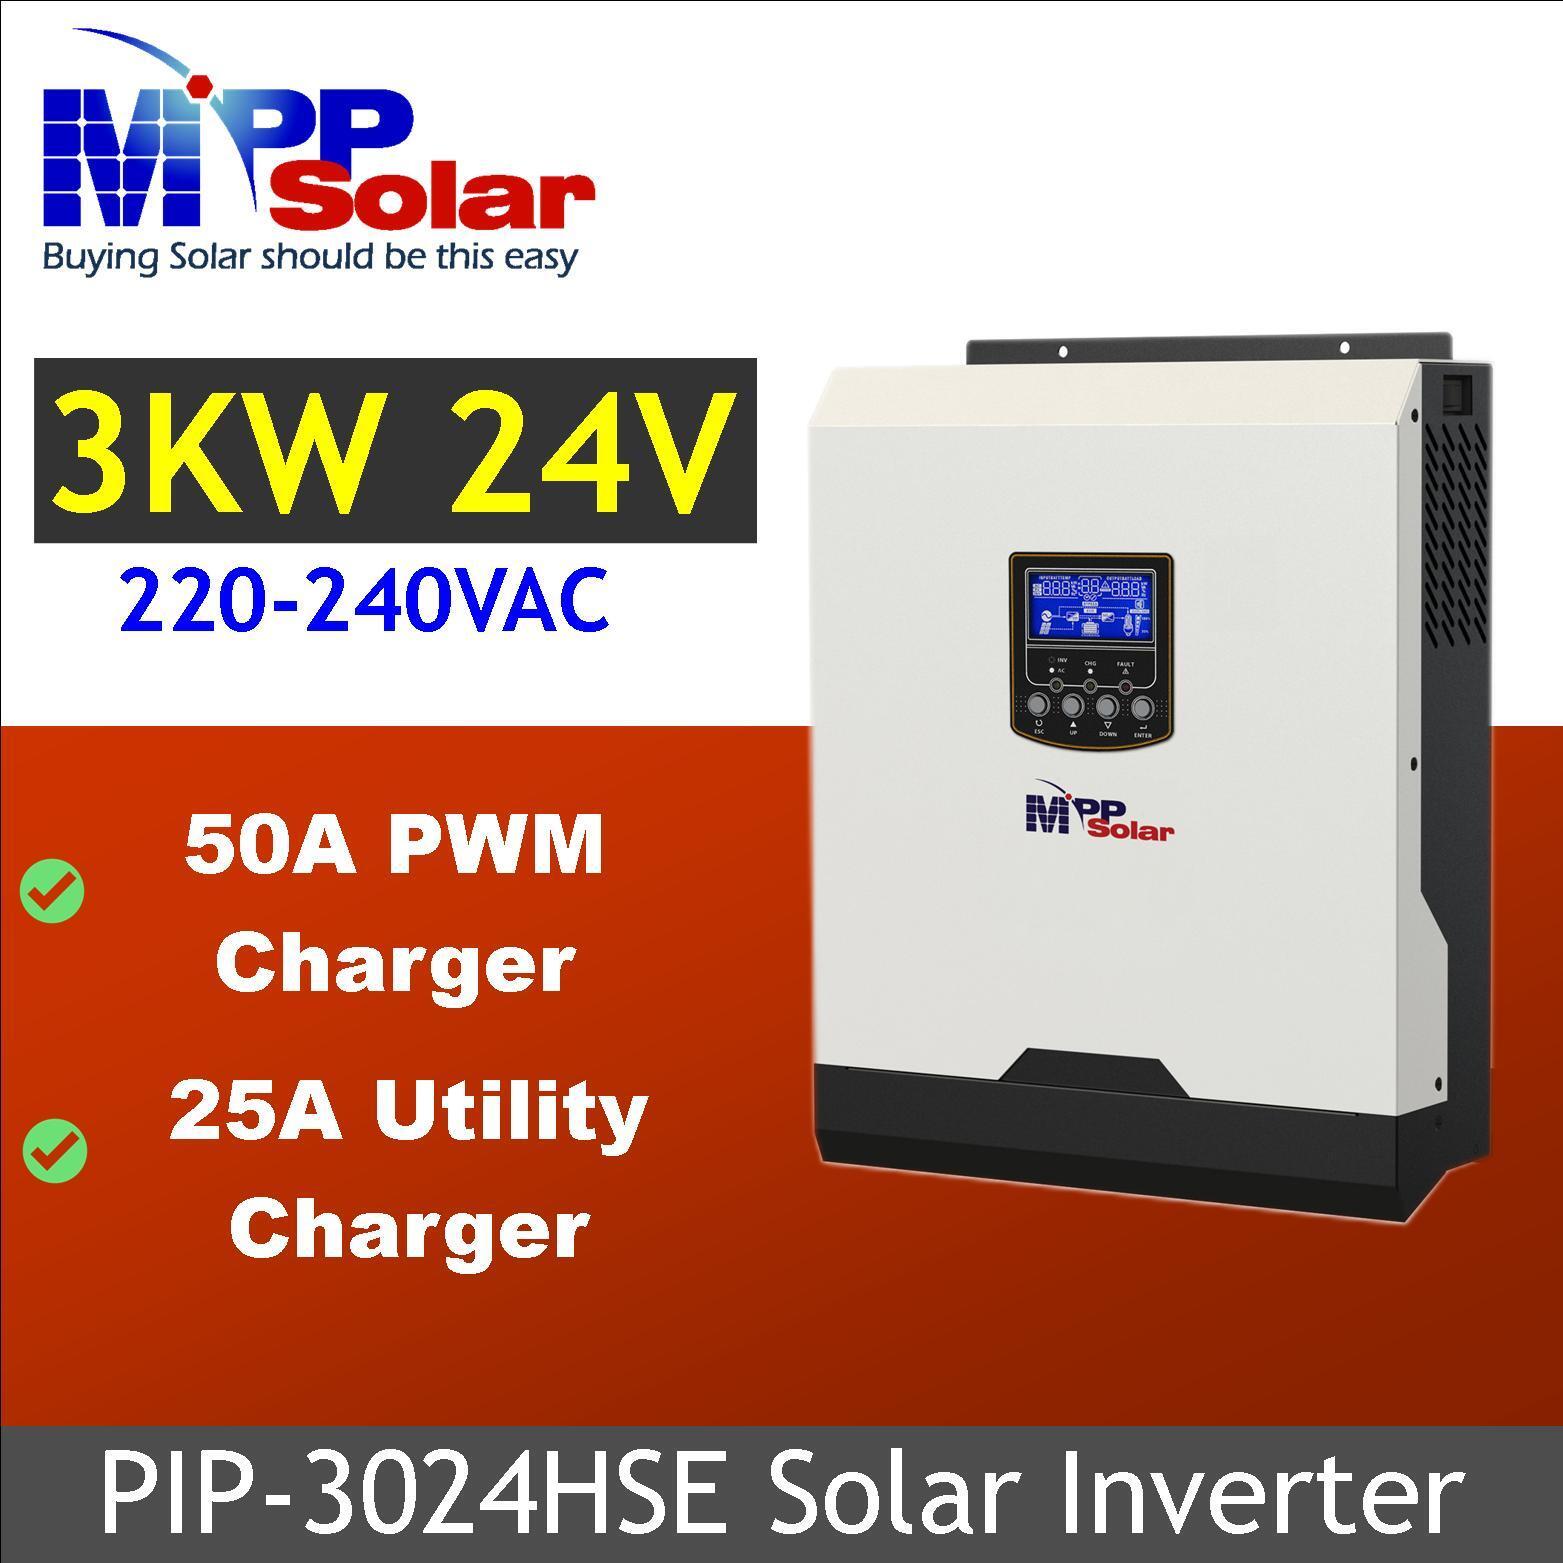 (HSE) Solar inverter 24v 3000w 230vac 50A PWM solar charger 25A battery charger